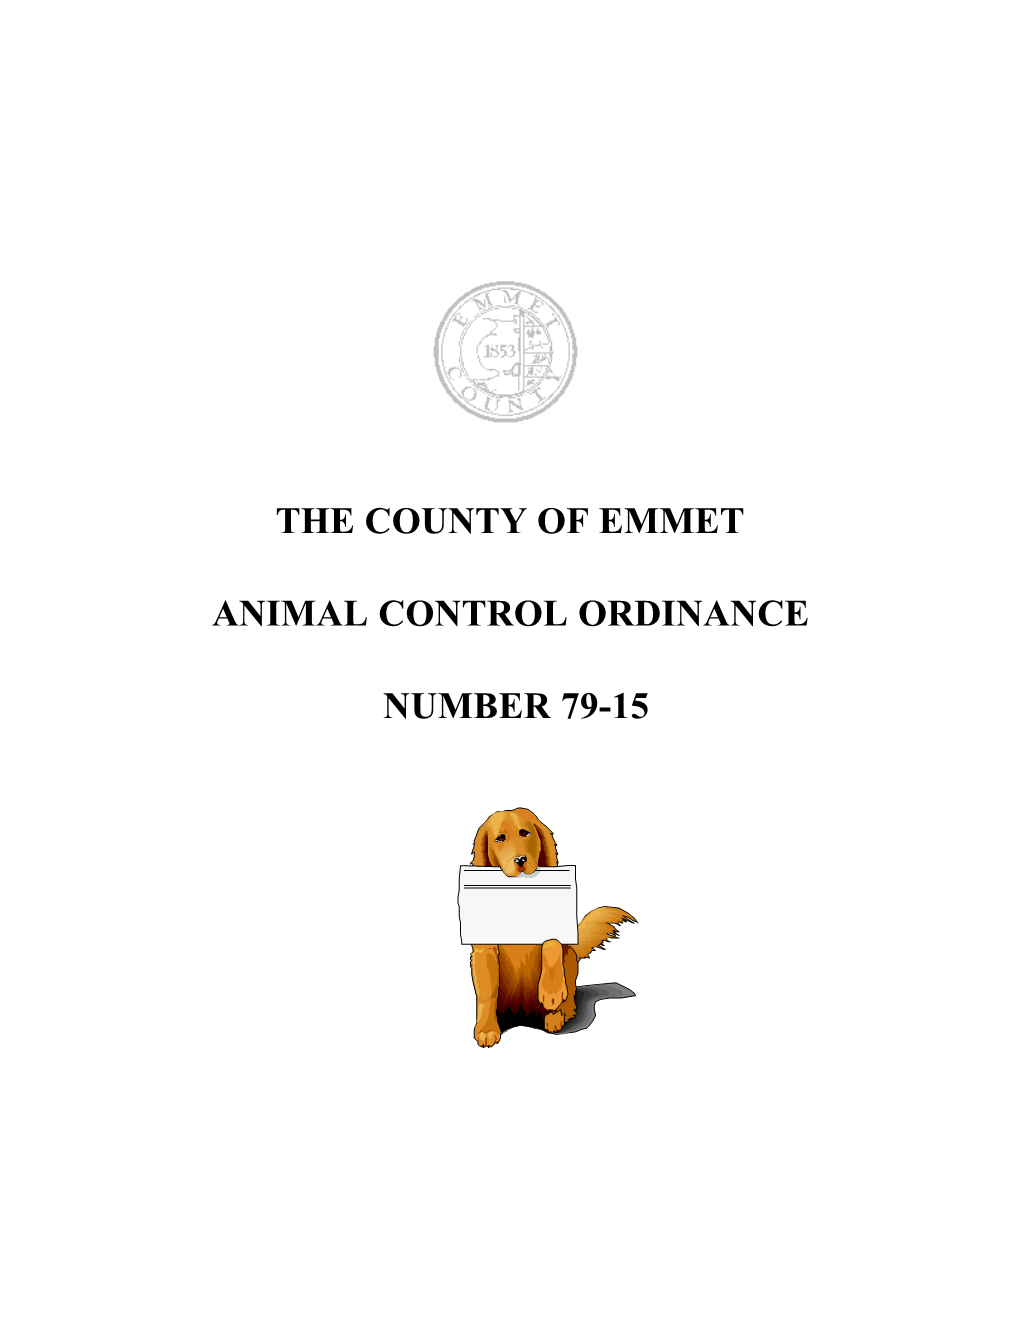 The County of Emmet Animal Control Ordinance Number 79-15